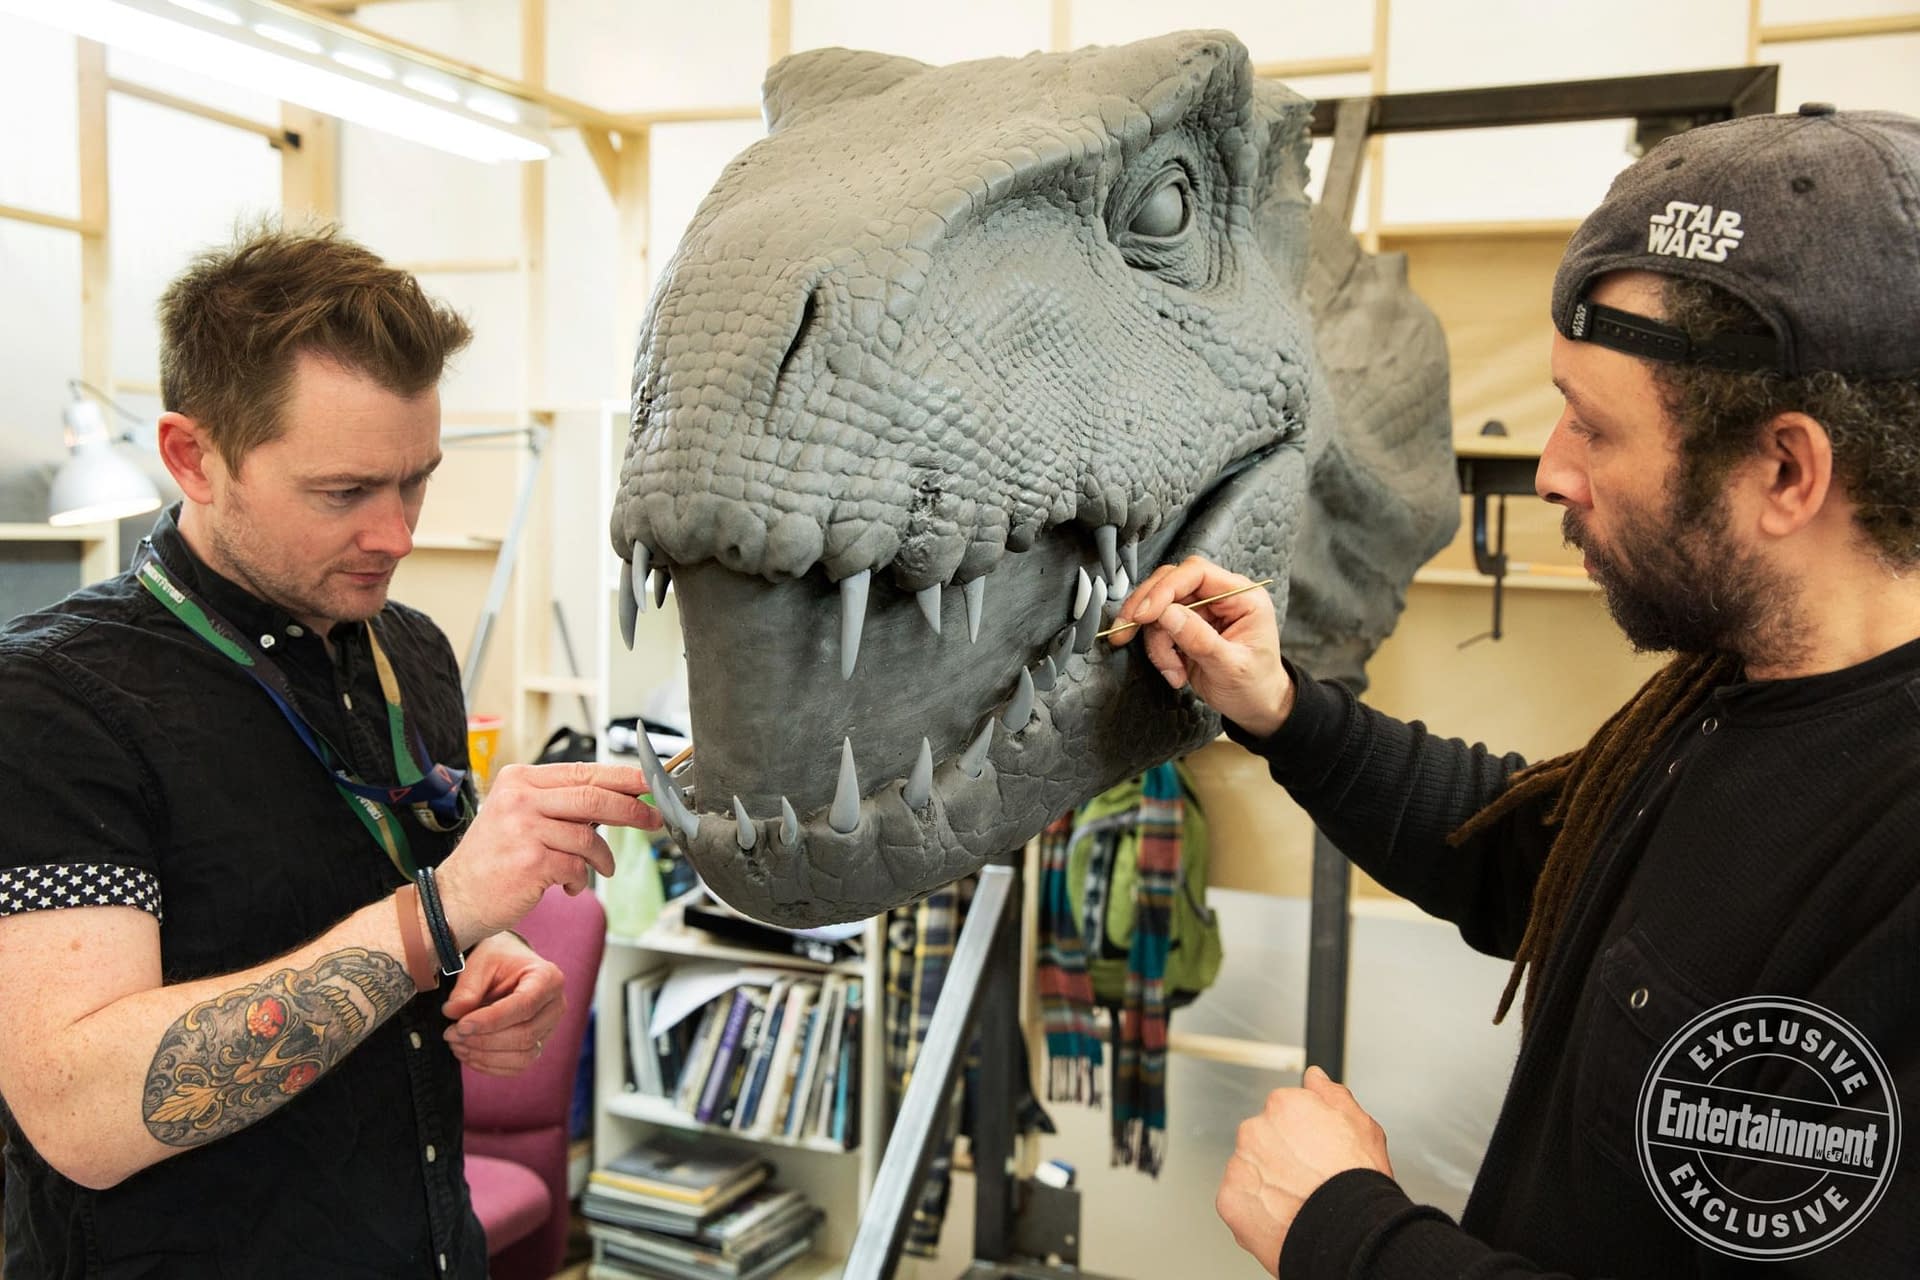 9 New Behind-the-Scenes Pictures from Jurassic World: Fallen Kingdom